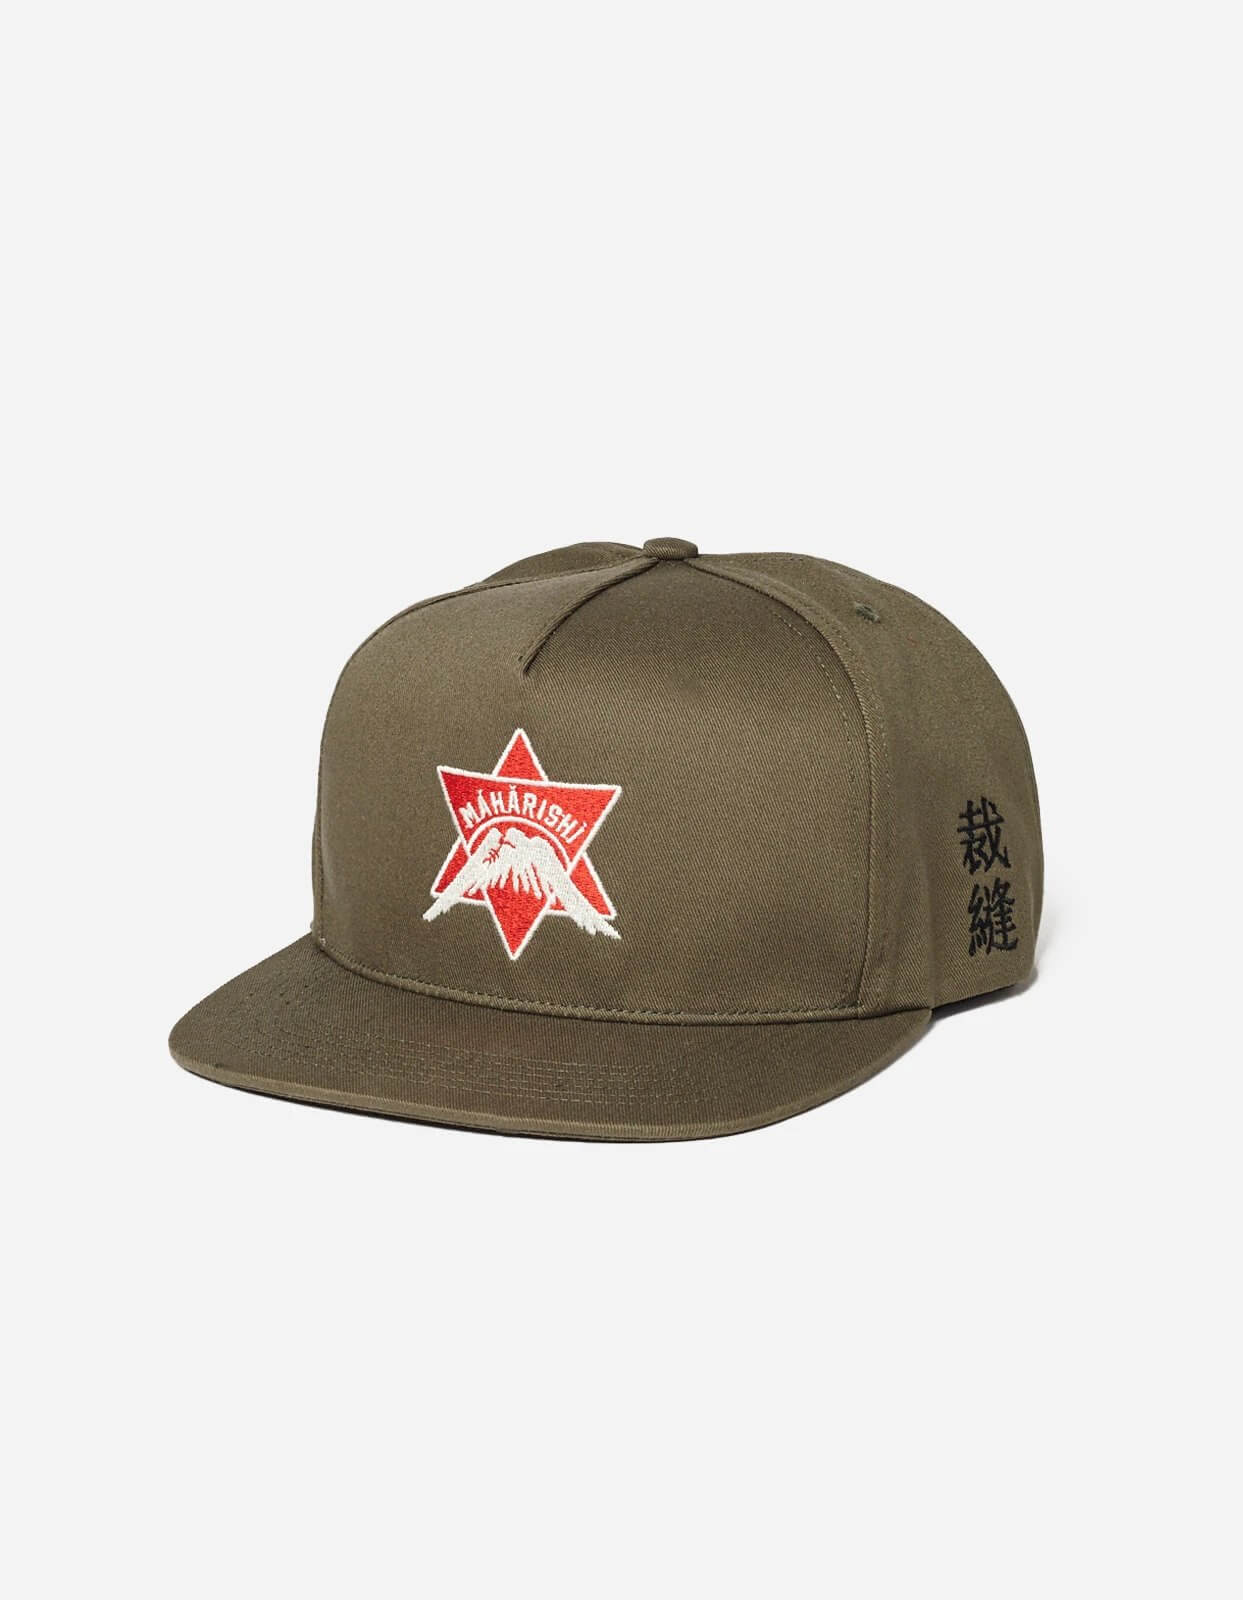 SS21_9340_TAILOR-CAP_Olive_10